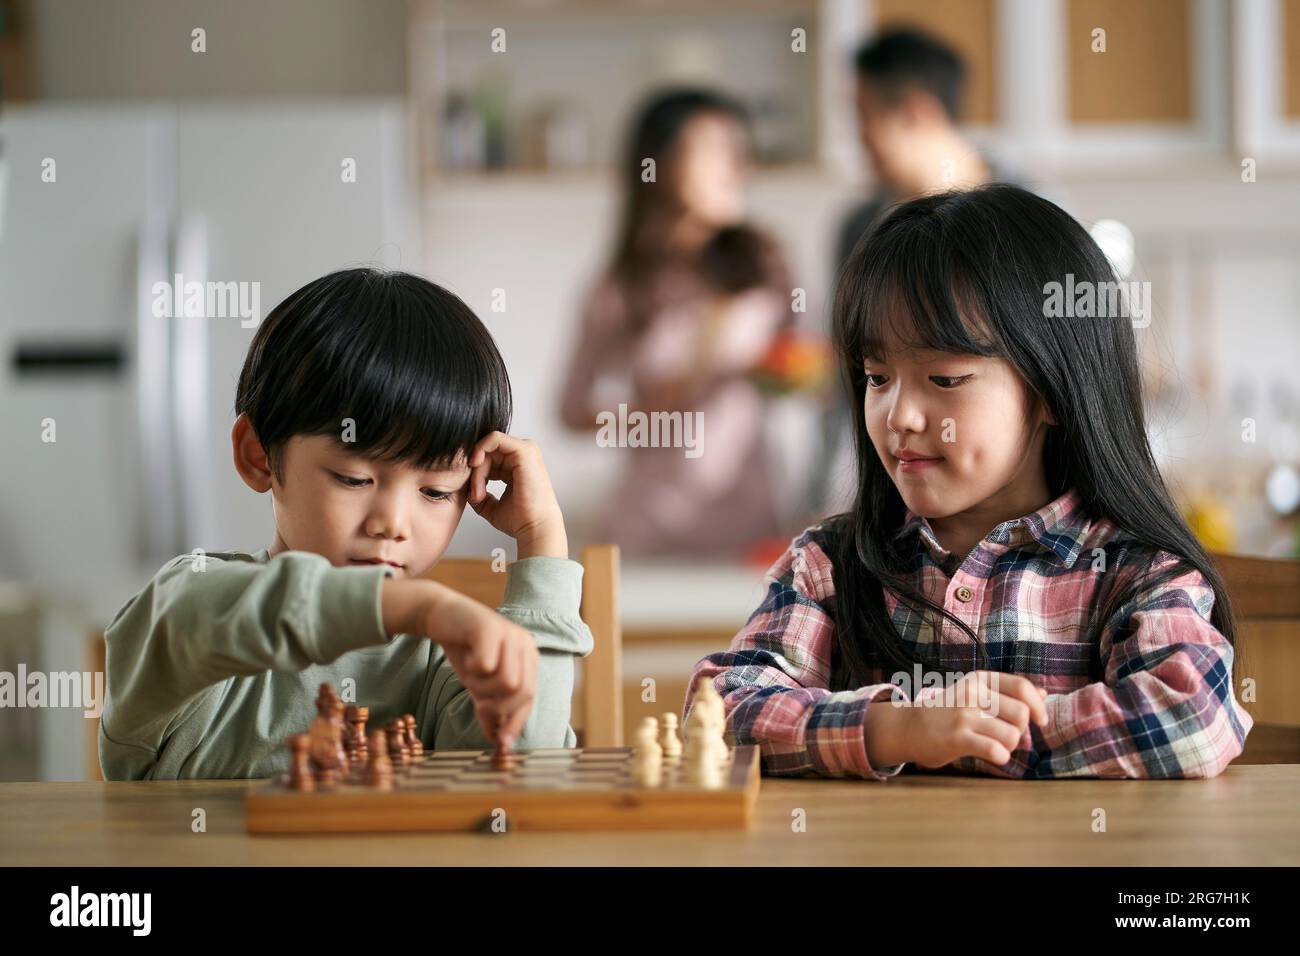 330,089 Asian Children Playing Images, Stock Photos, 3D objects, & Vectors